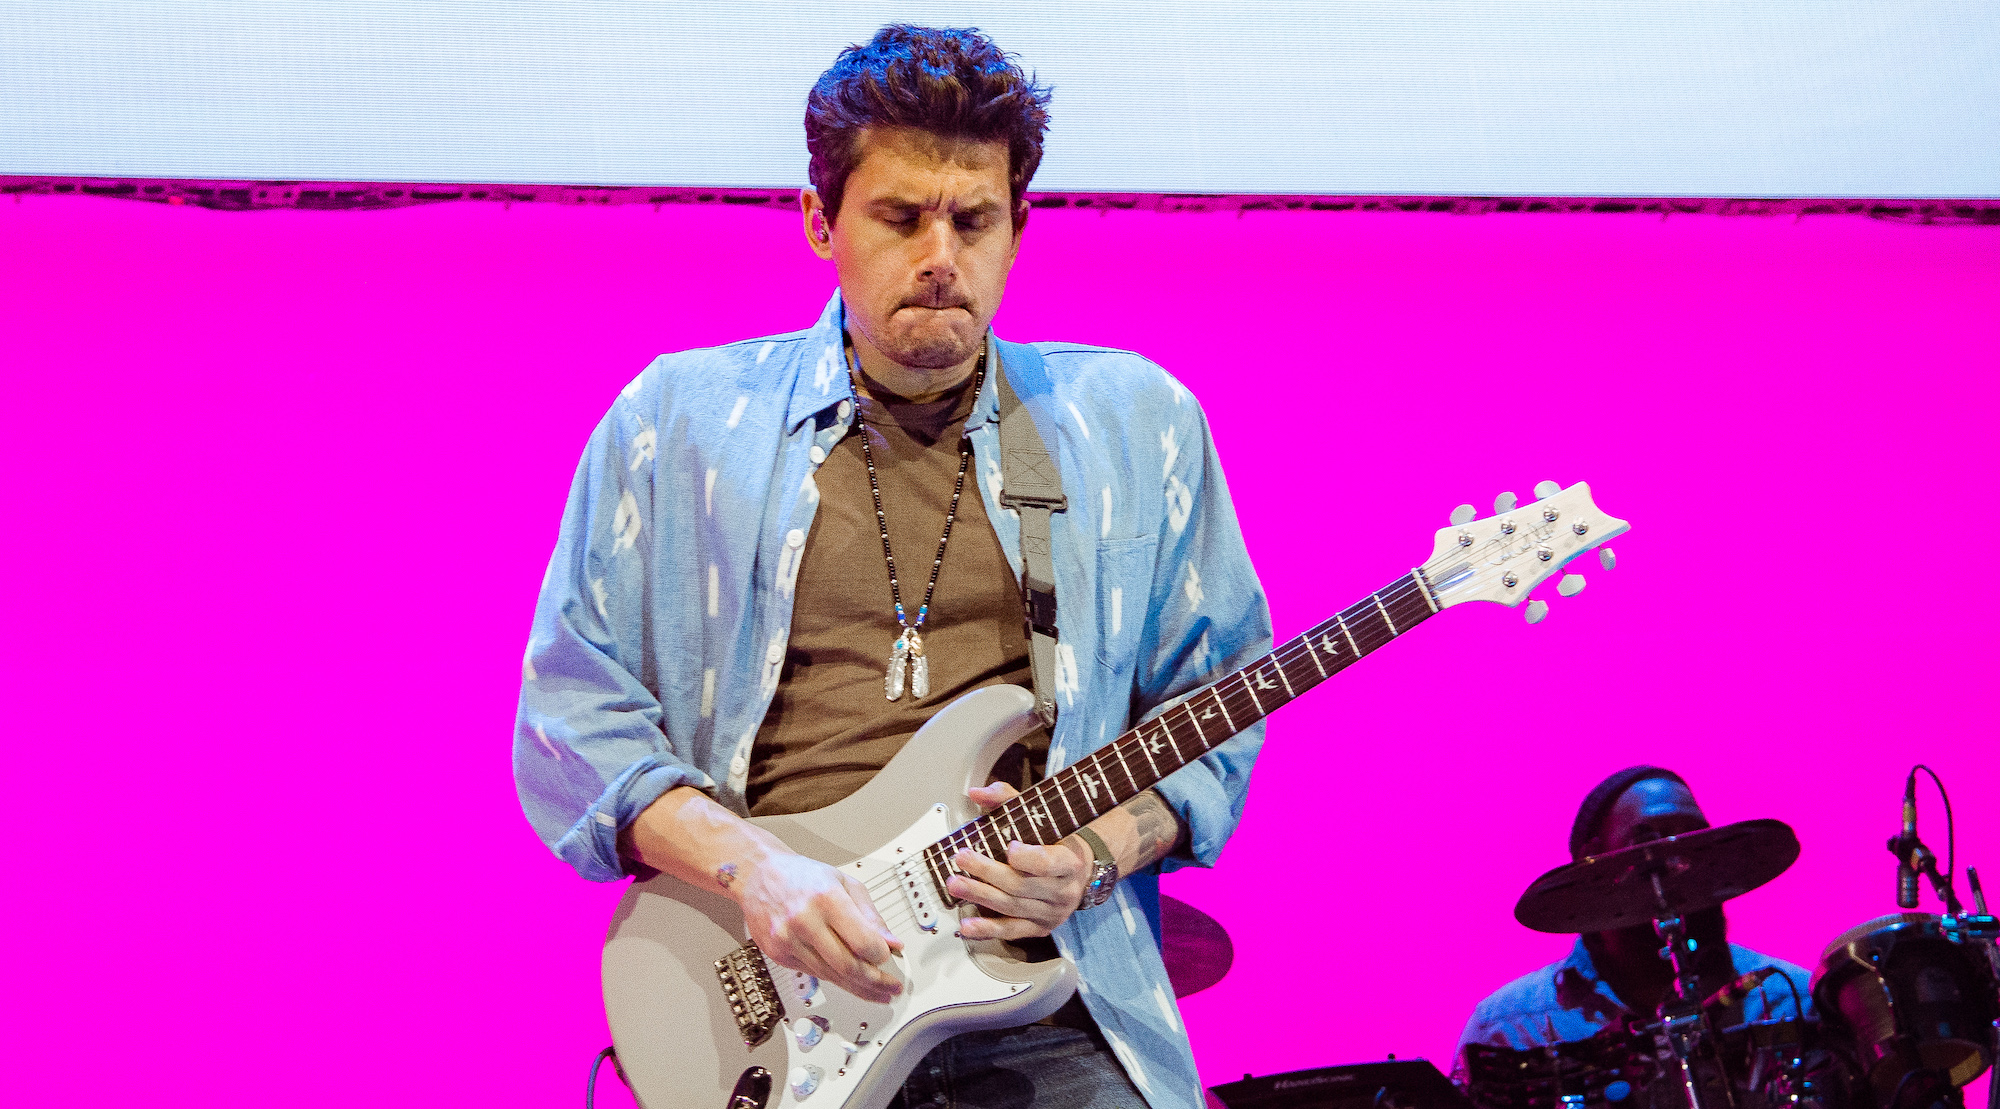 “John had to send a text with a photo of a piece of paper, where he scribbled, ‘Yes, it’s me!’”: Before the Silver Sky was built, John Mayer cold-called PRS to discuss working on a guitar together – but the phone operator hung up on him